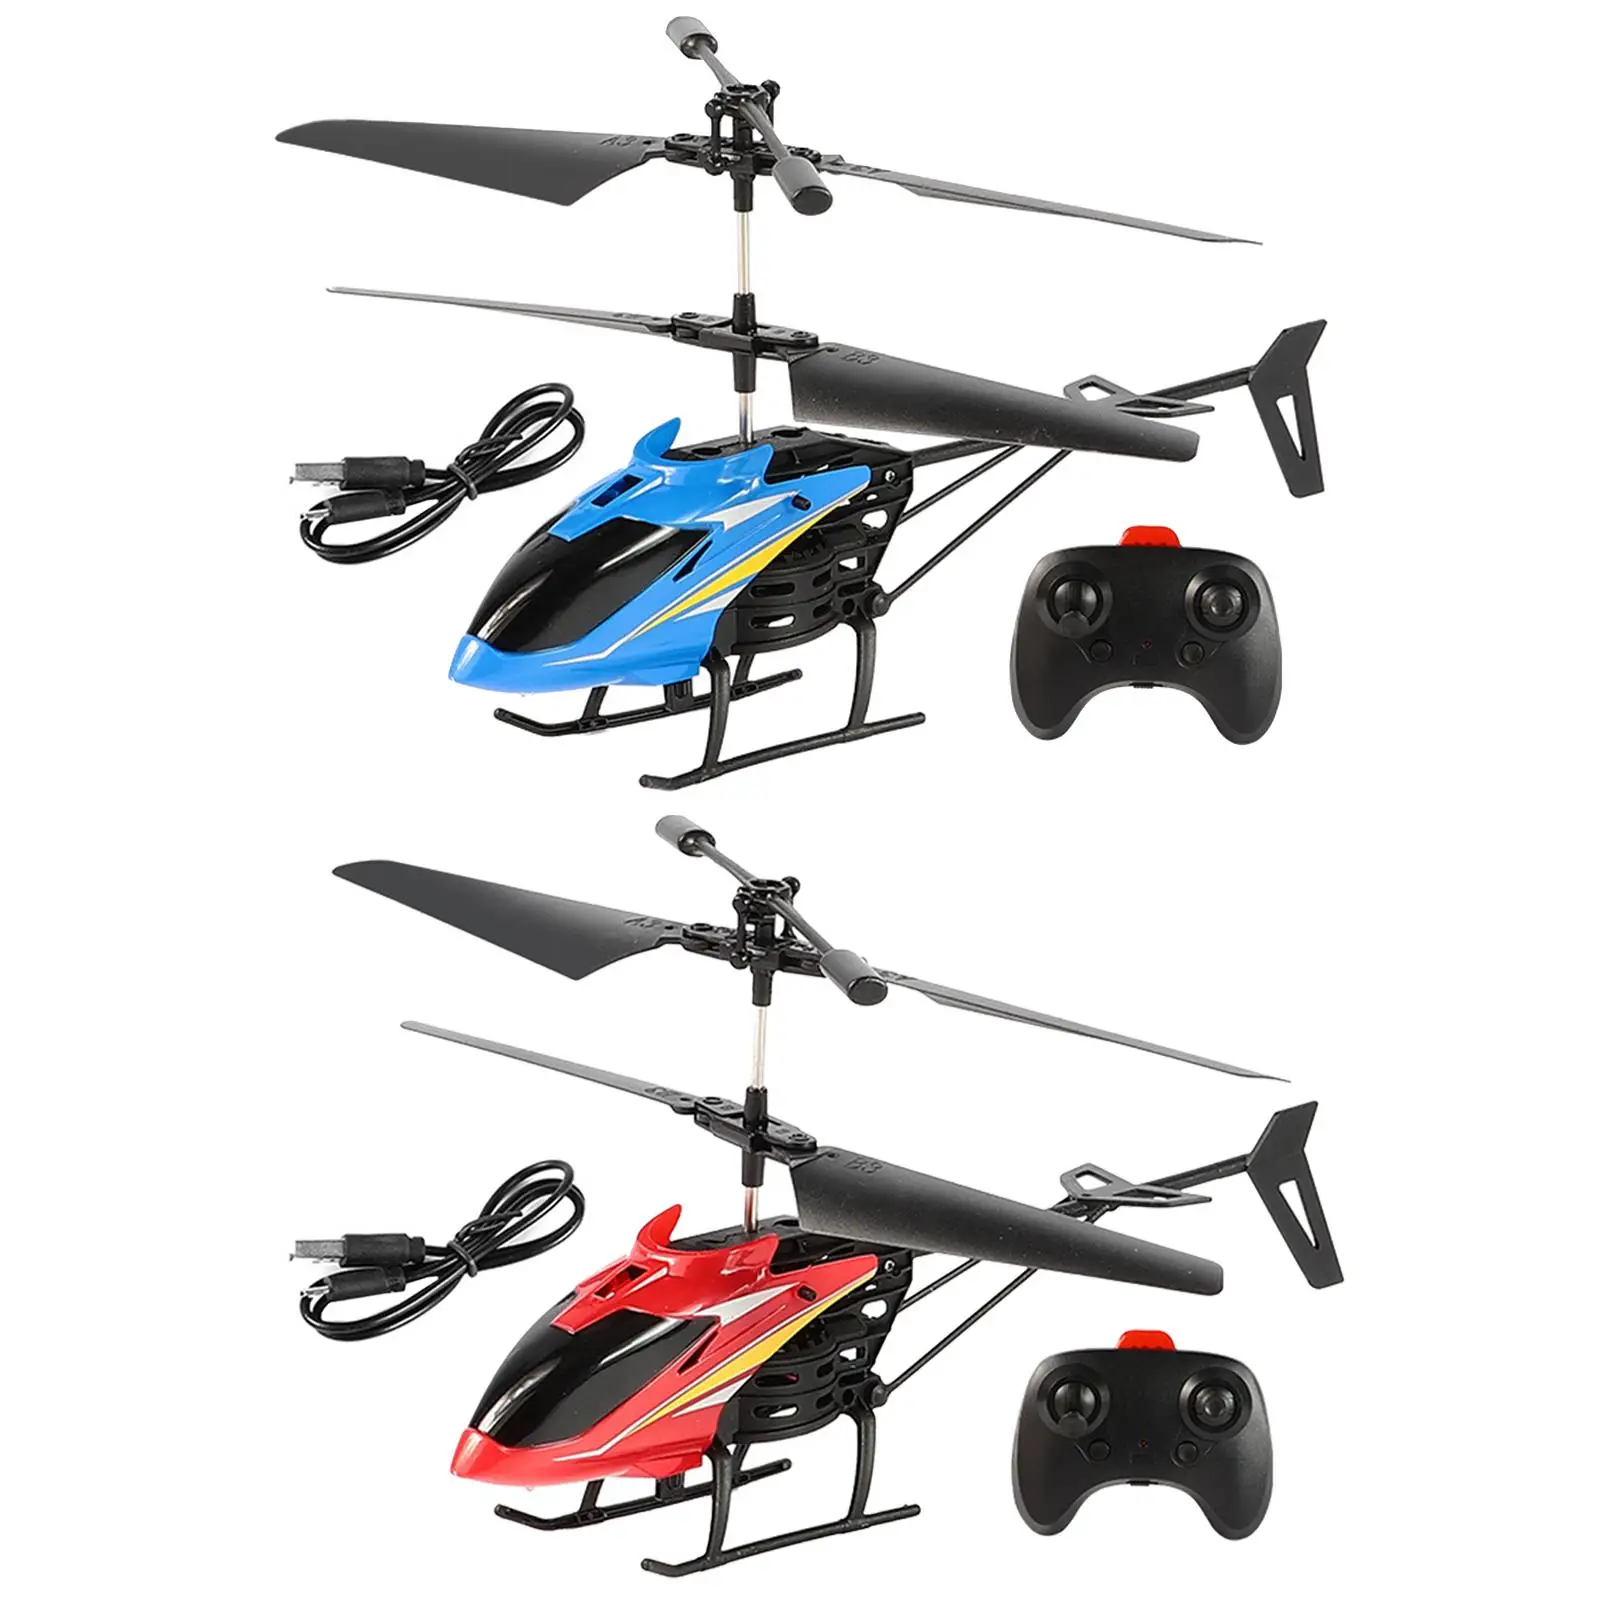 

Remote Control Helicopter Gyro Stabilizer Aircraft 2.4GHz Altitude Hold LED Light Toys RC Helicopters for Beginners Adults Kids